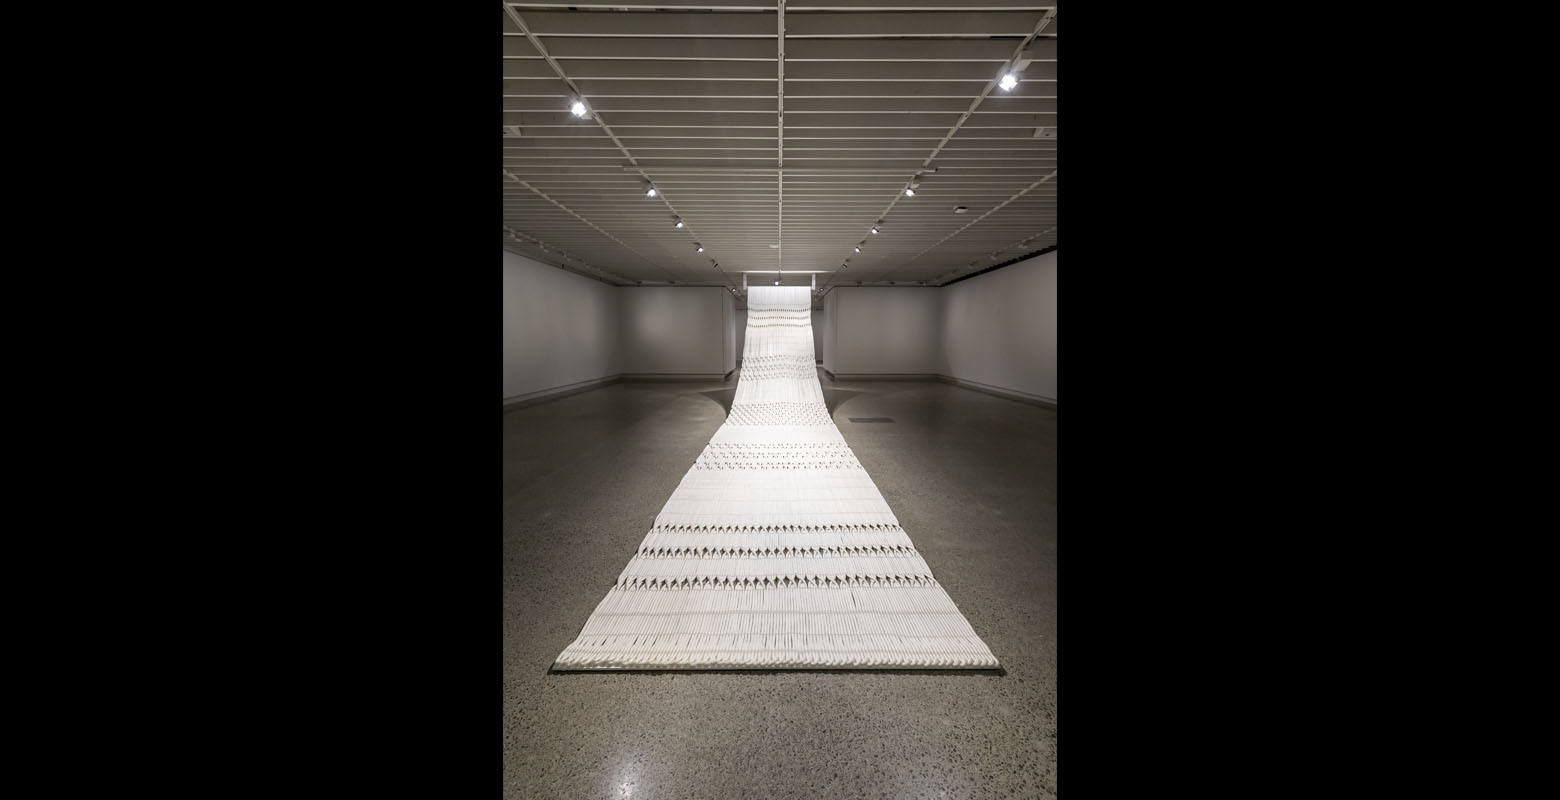 A large-scale artwork made of marine rope woven together, with various patterns, suspended from the ceiling and draping over the floor